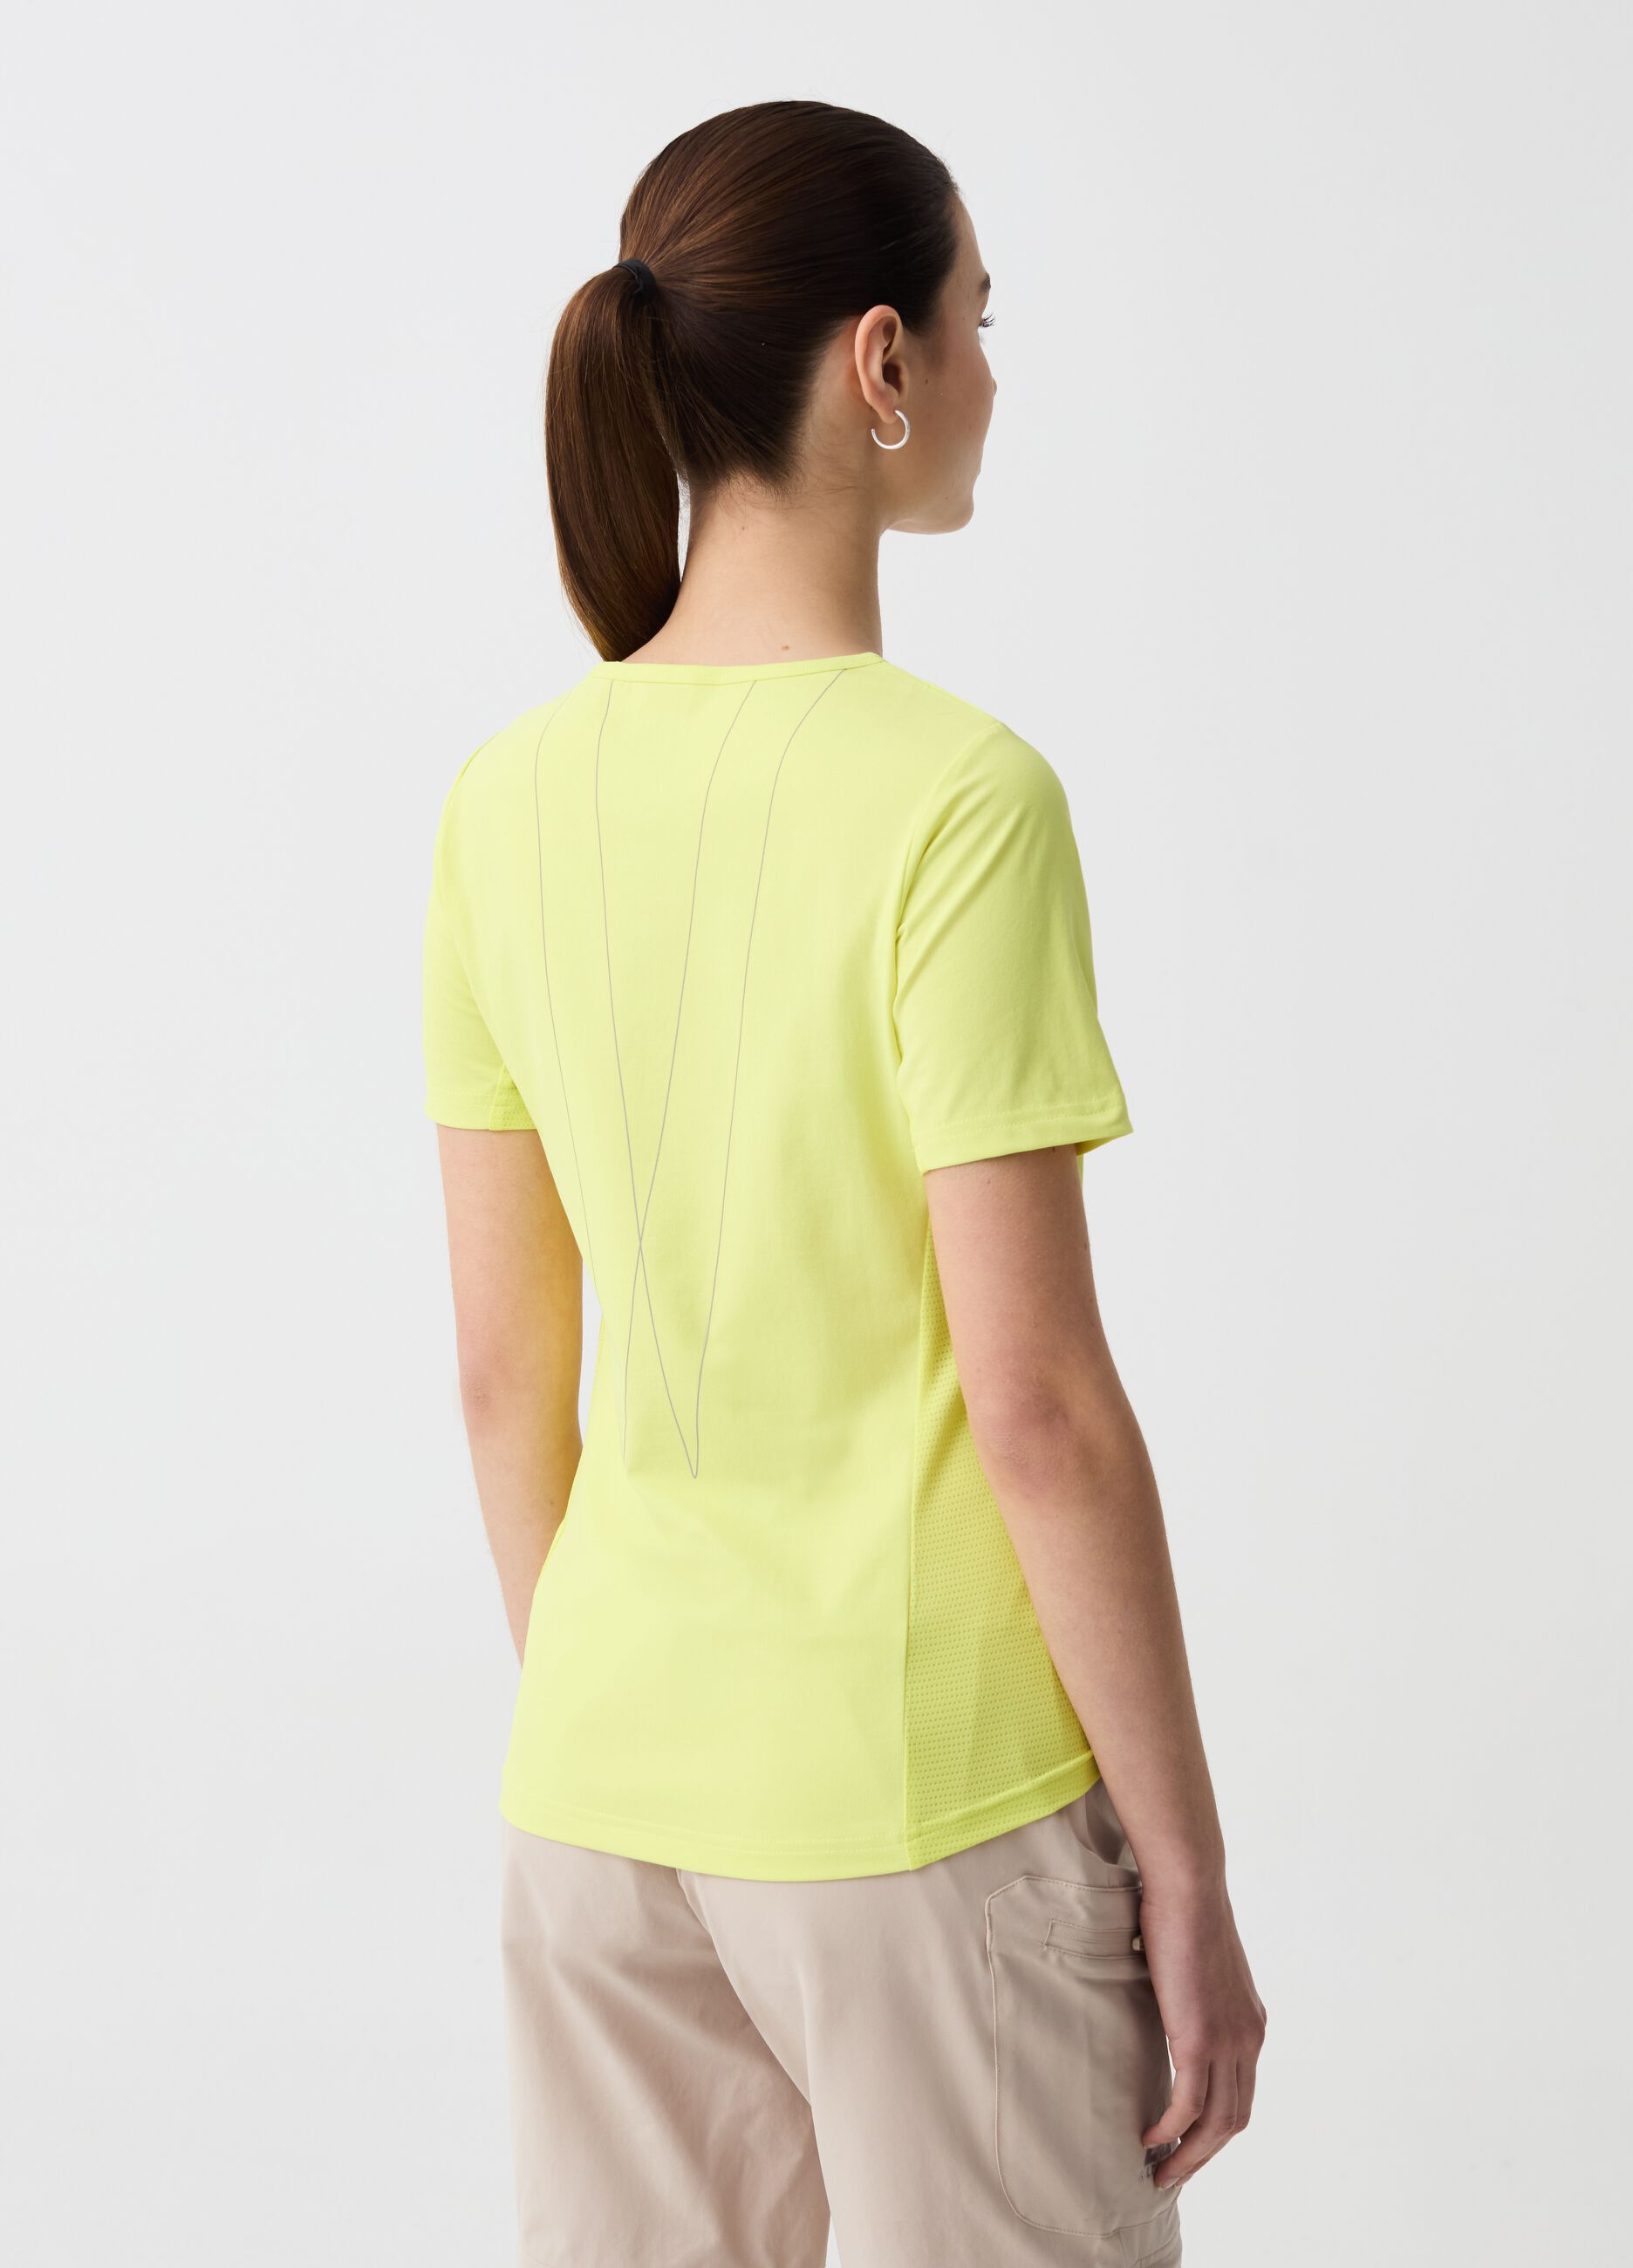 Altavia T-shirt in technical fabric with print